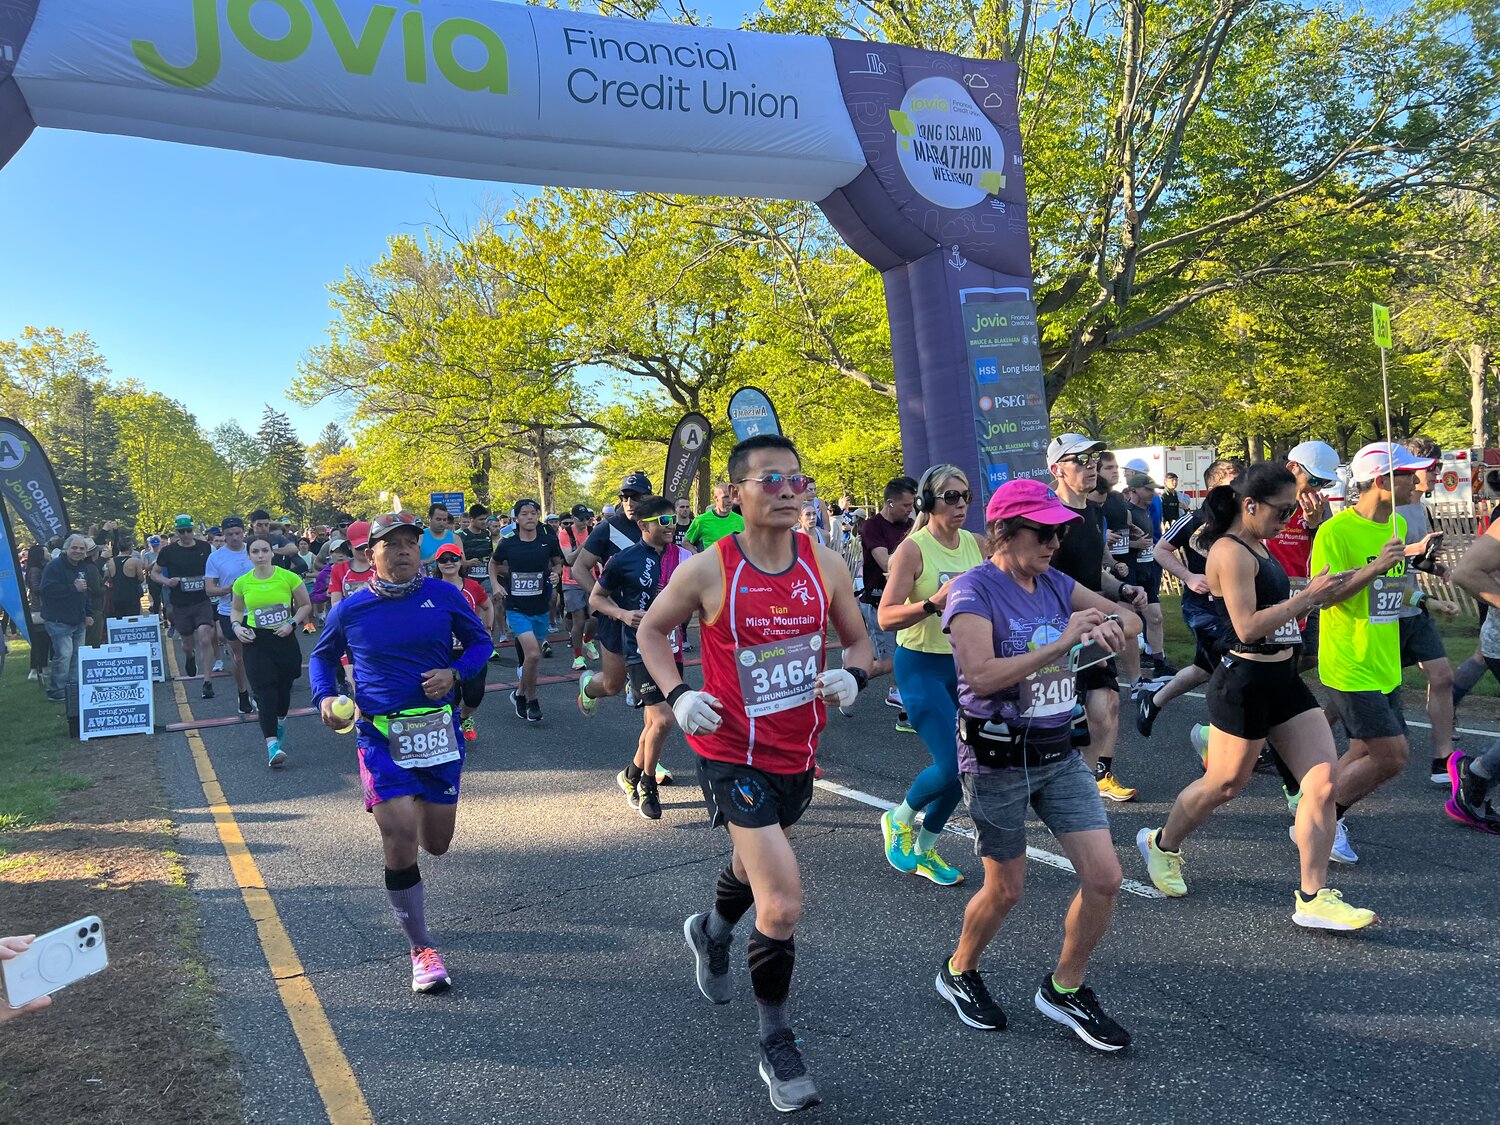 Some 2,000 runners hit the pavement last weekend as part of the Jovia Long Island Marathon that started and ended at the center of Eisenhower Park.